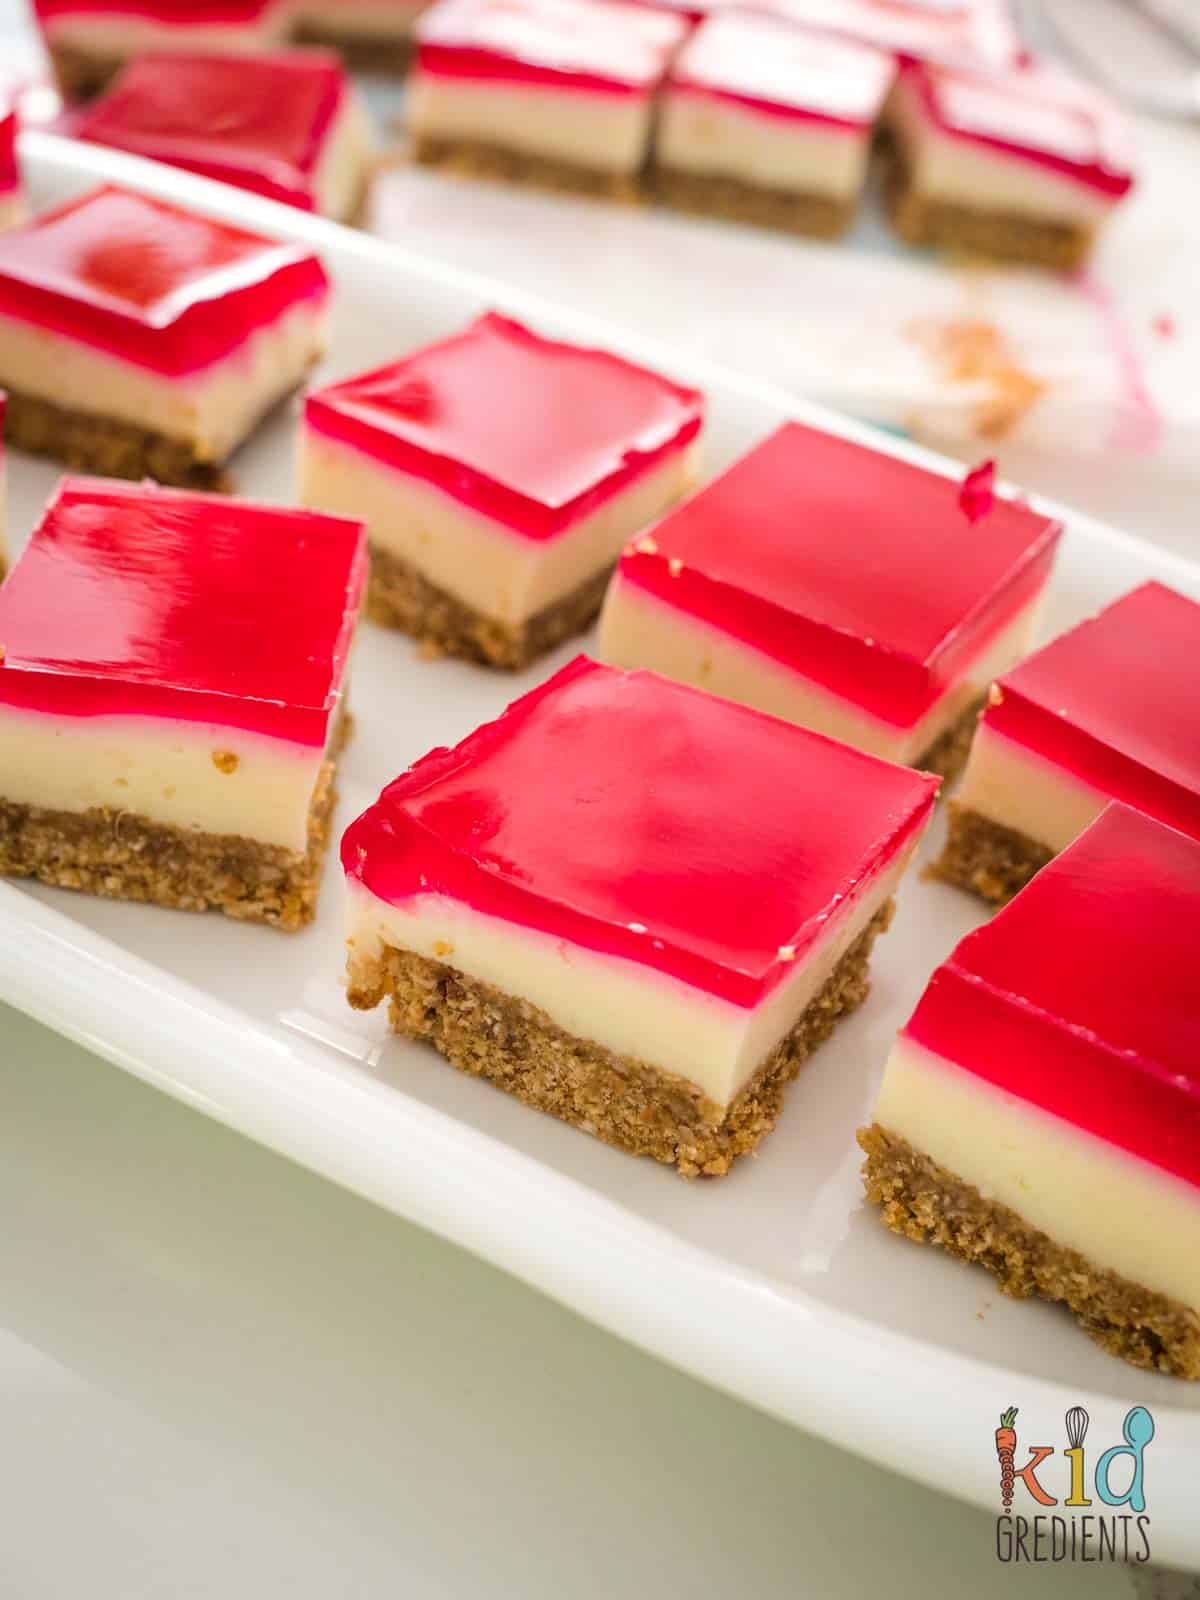 jelly slice cut into squares on a plate